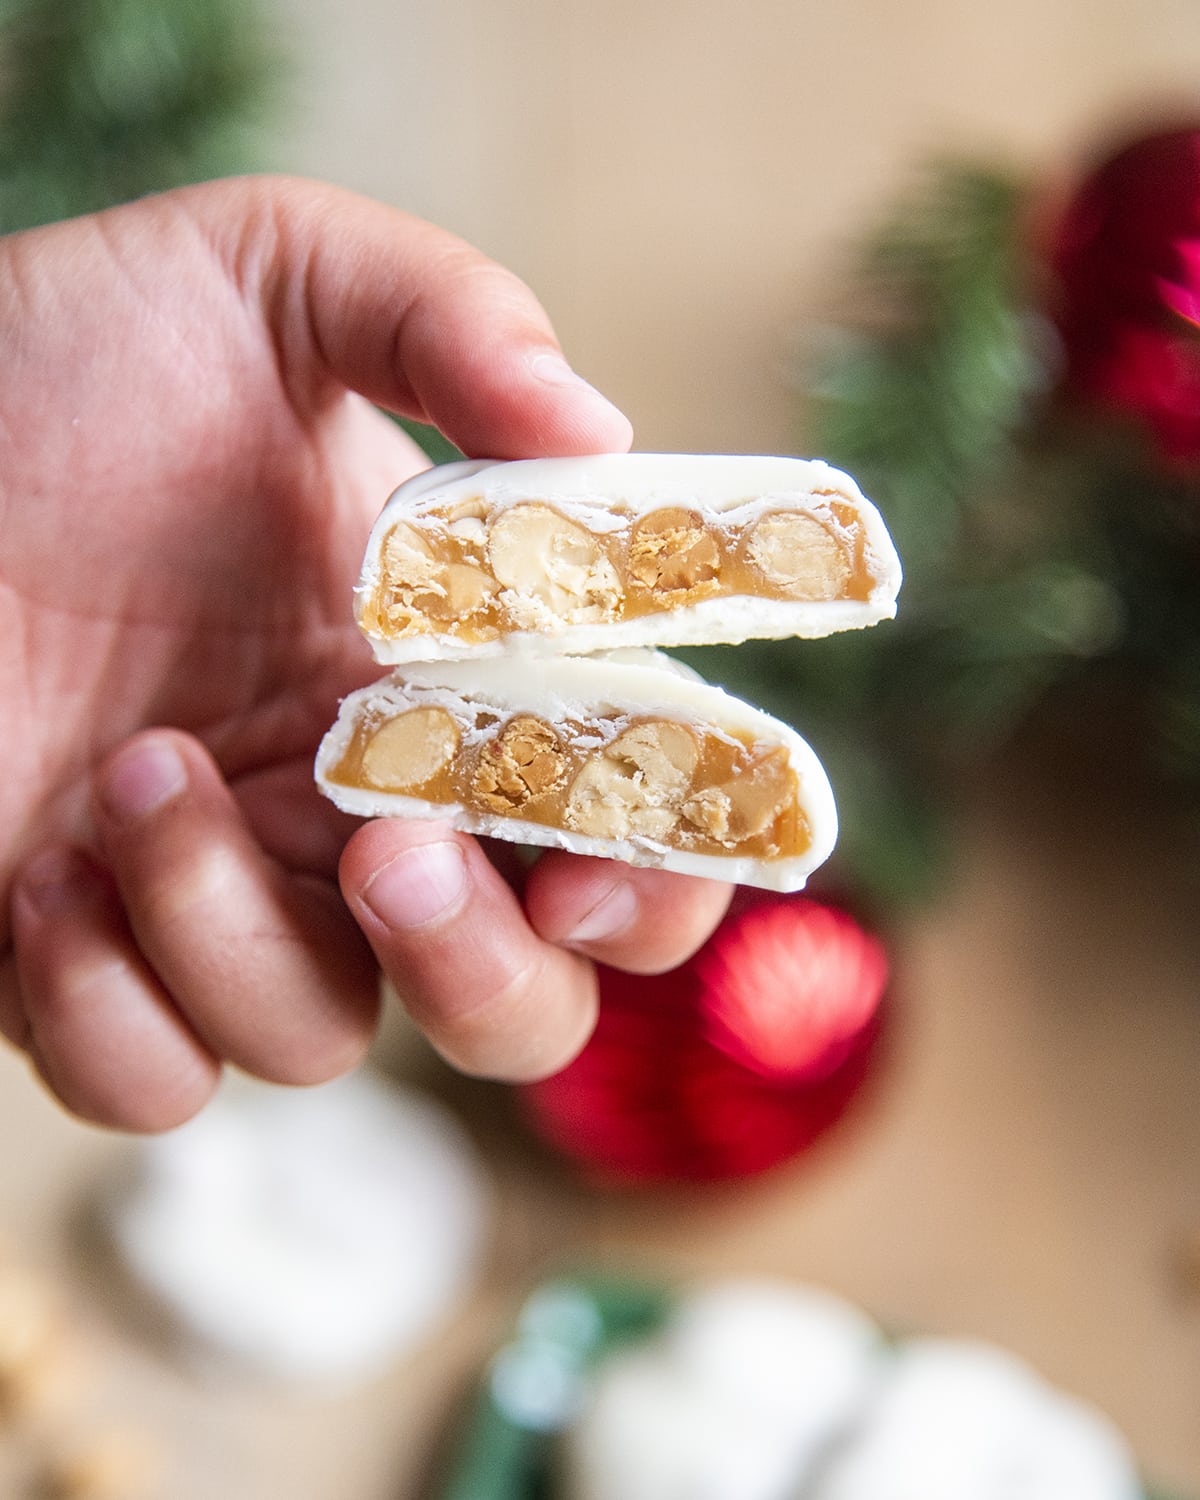 A hand holding two pieces of polar bear paw candies cut in half showing the caramel and pecans in the middle.